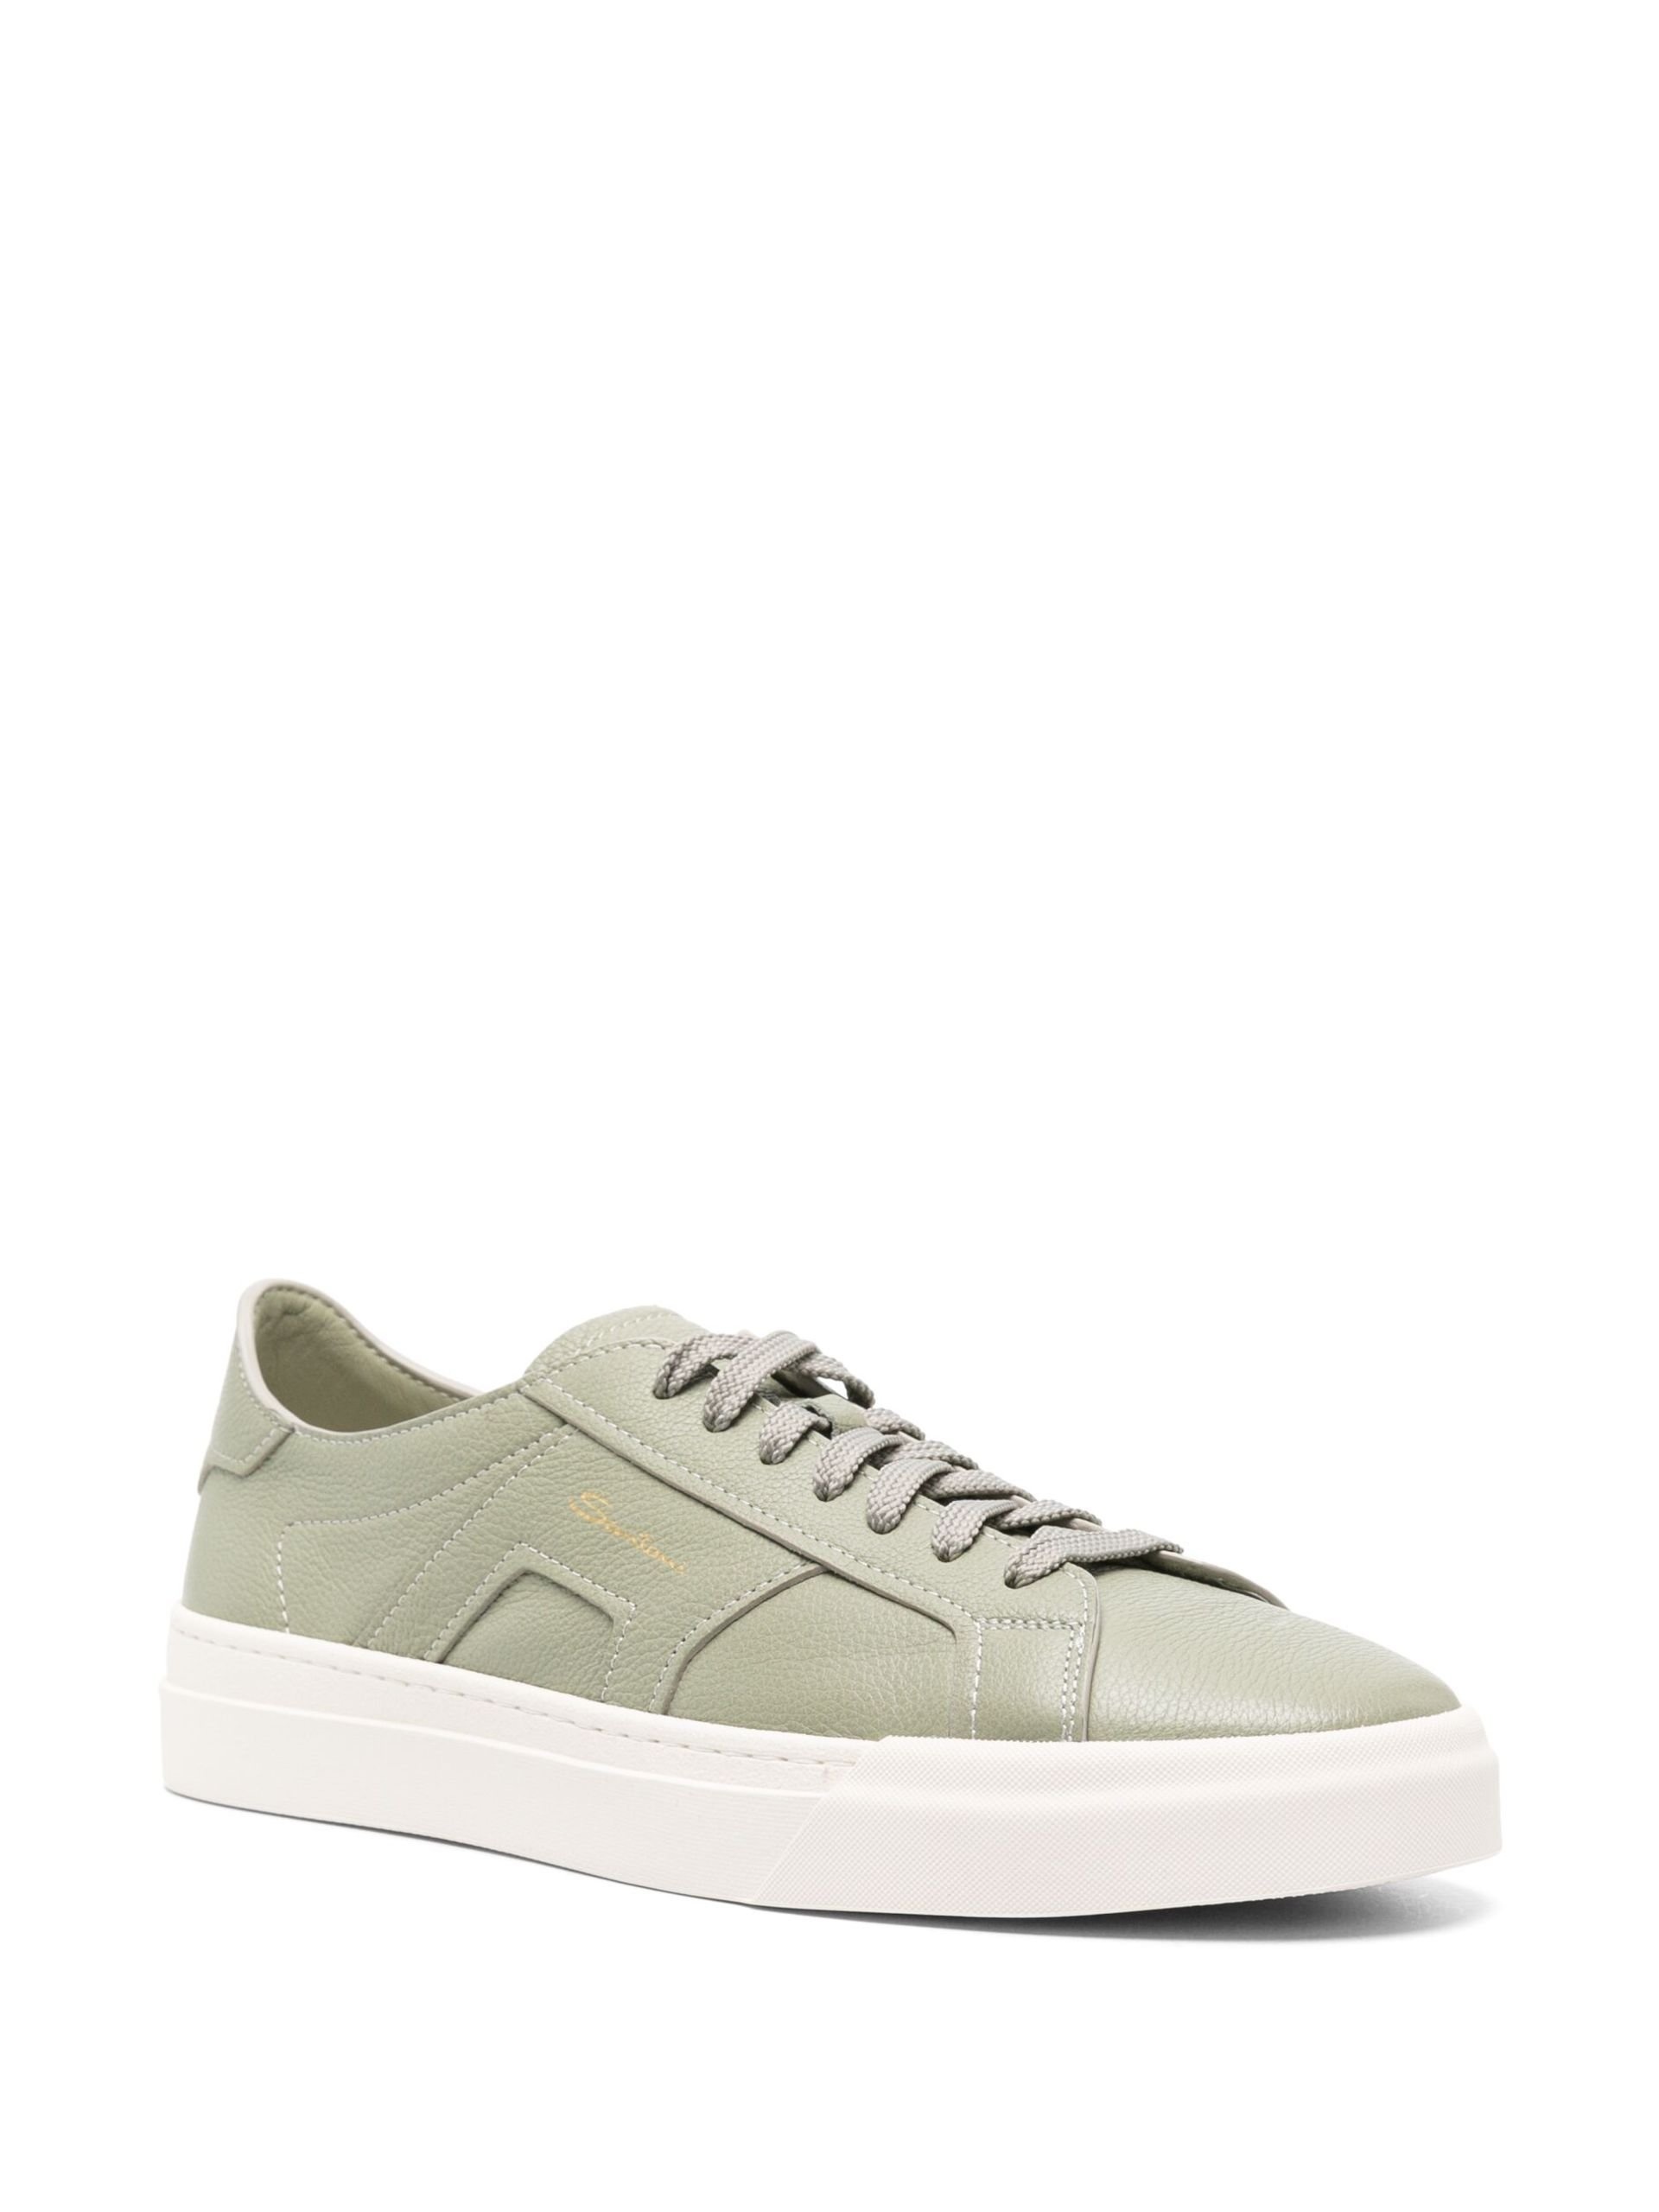 Green Leather Sneakers - 2